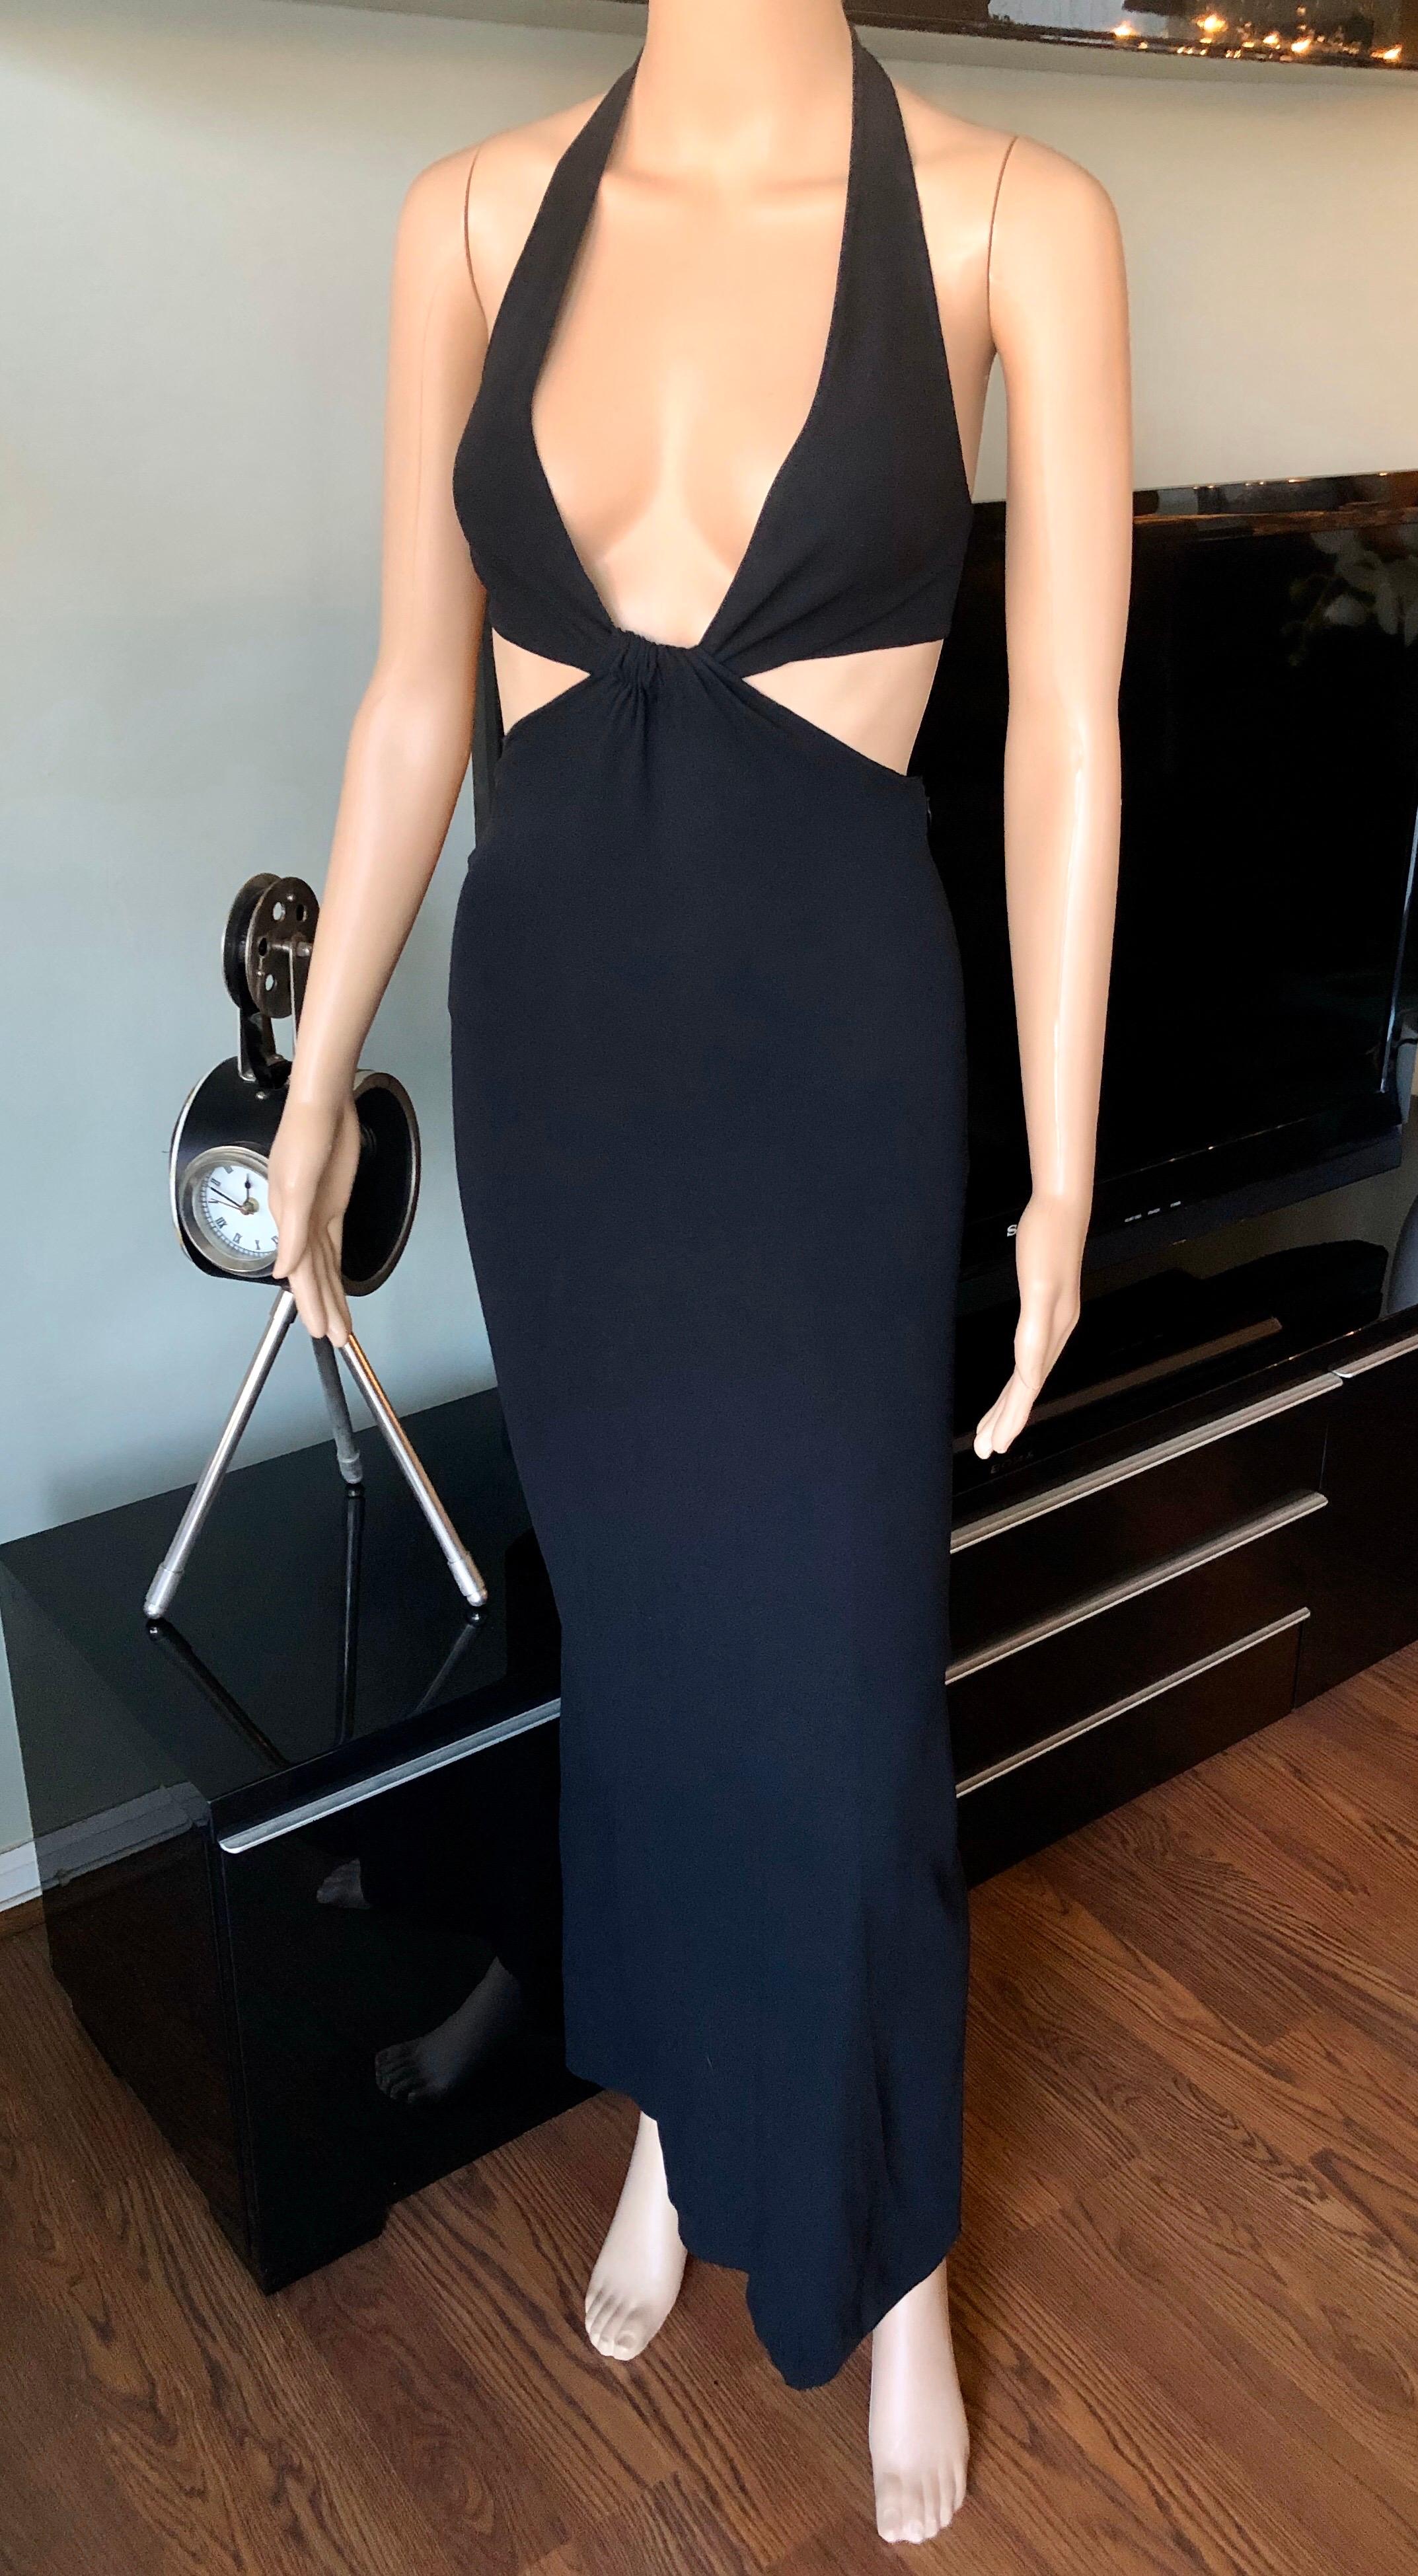 Celine Vintage Cutout Black Maxi Dress Gown FR 36

Celine maxi dress featuring plunging neckline, cutout accents at waist and concealed zip featuring clasp closure at back. 
